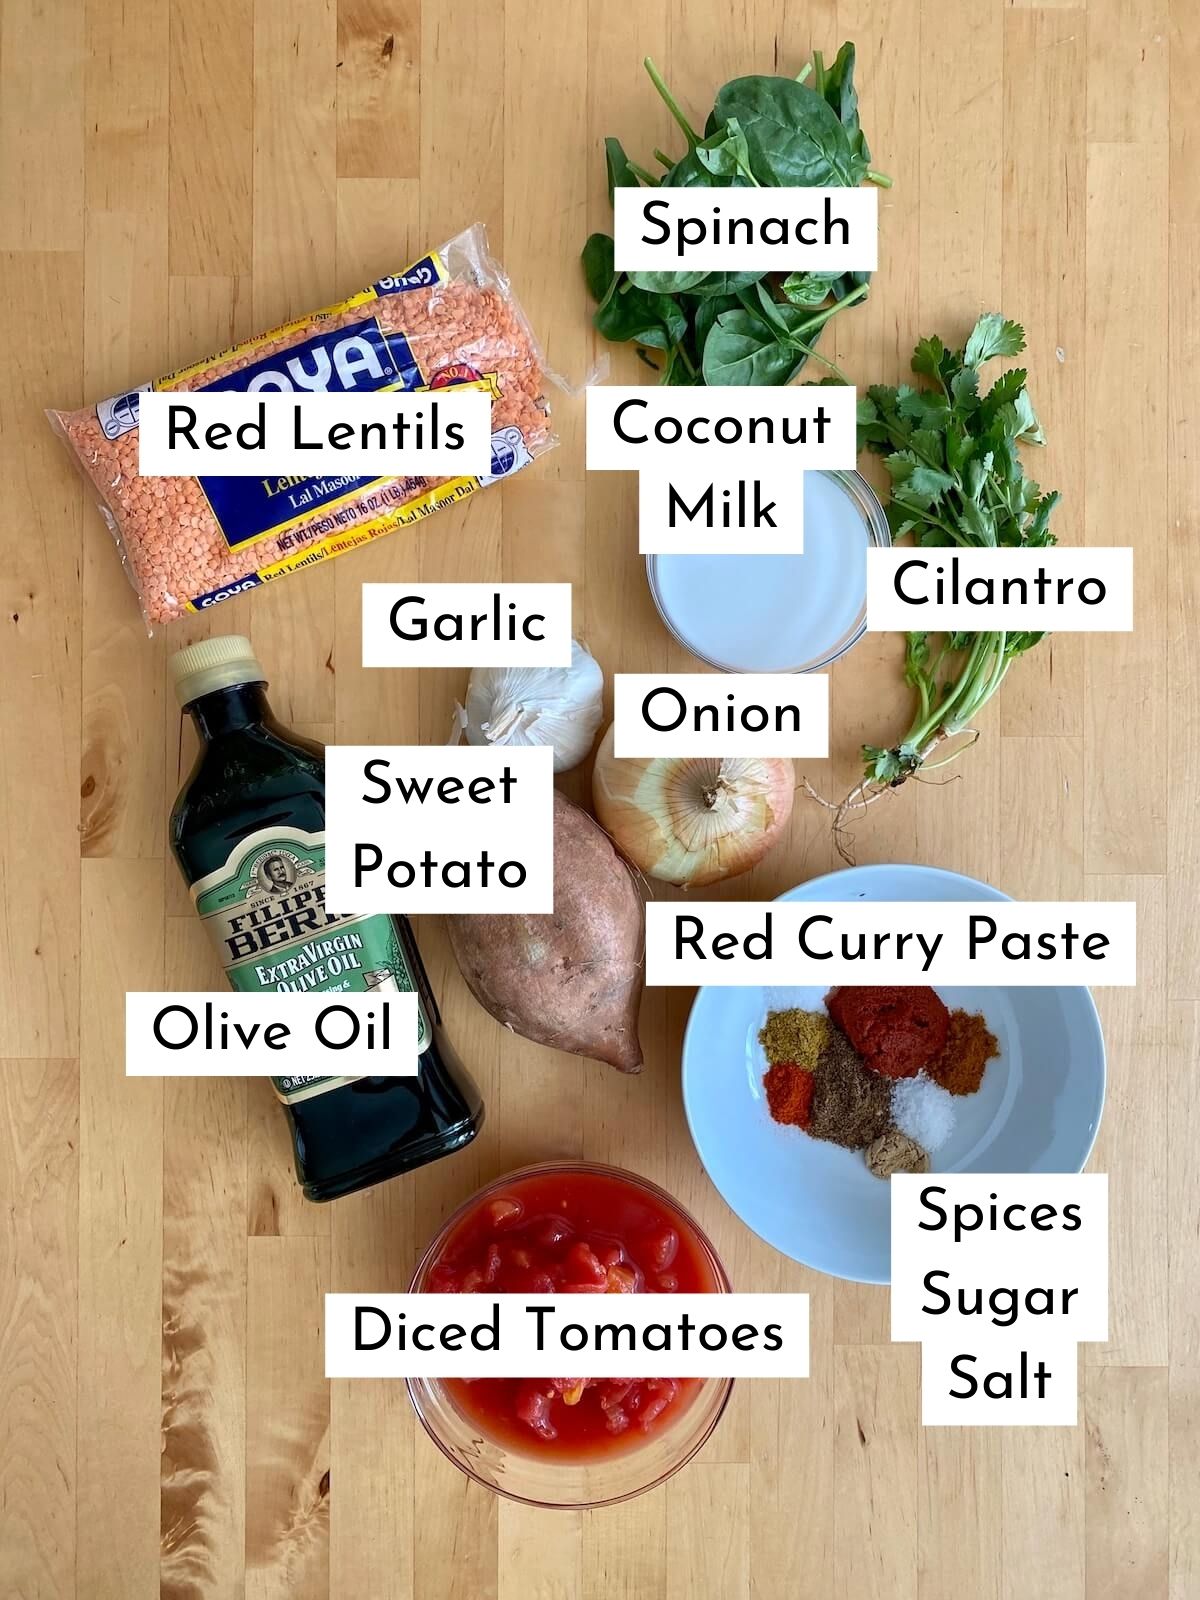 The ingredients to make red lentil and sweet potato curry laid out on a butcher block countertop. Each ingredient is labeled with text. The ingredients include red lentils, spinach, garlic, onion, sweet potato, coconut milk, olive oil, diced tomatoes, red curry paste, cilantro, spices, sugar, and salt.